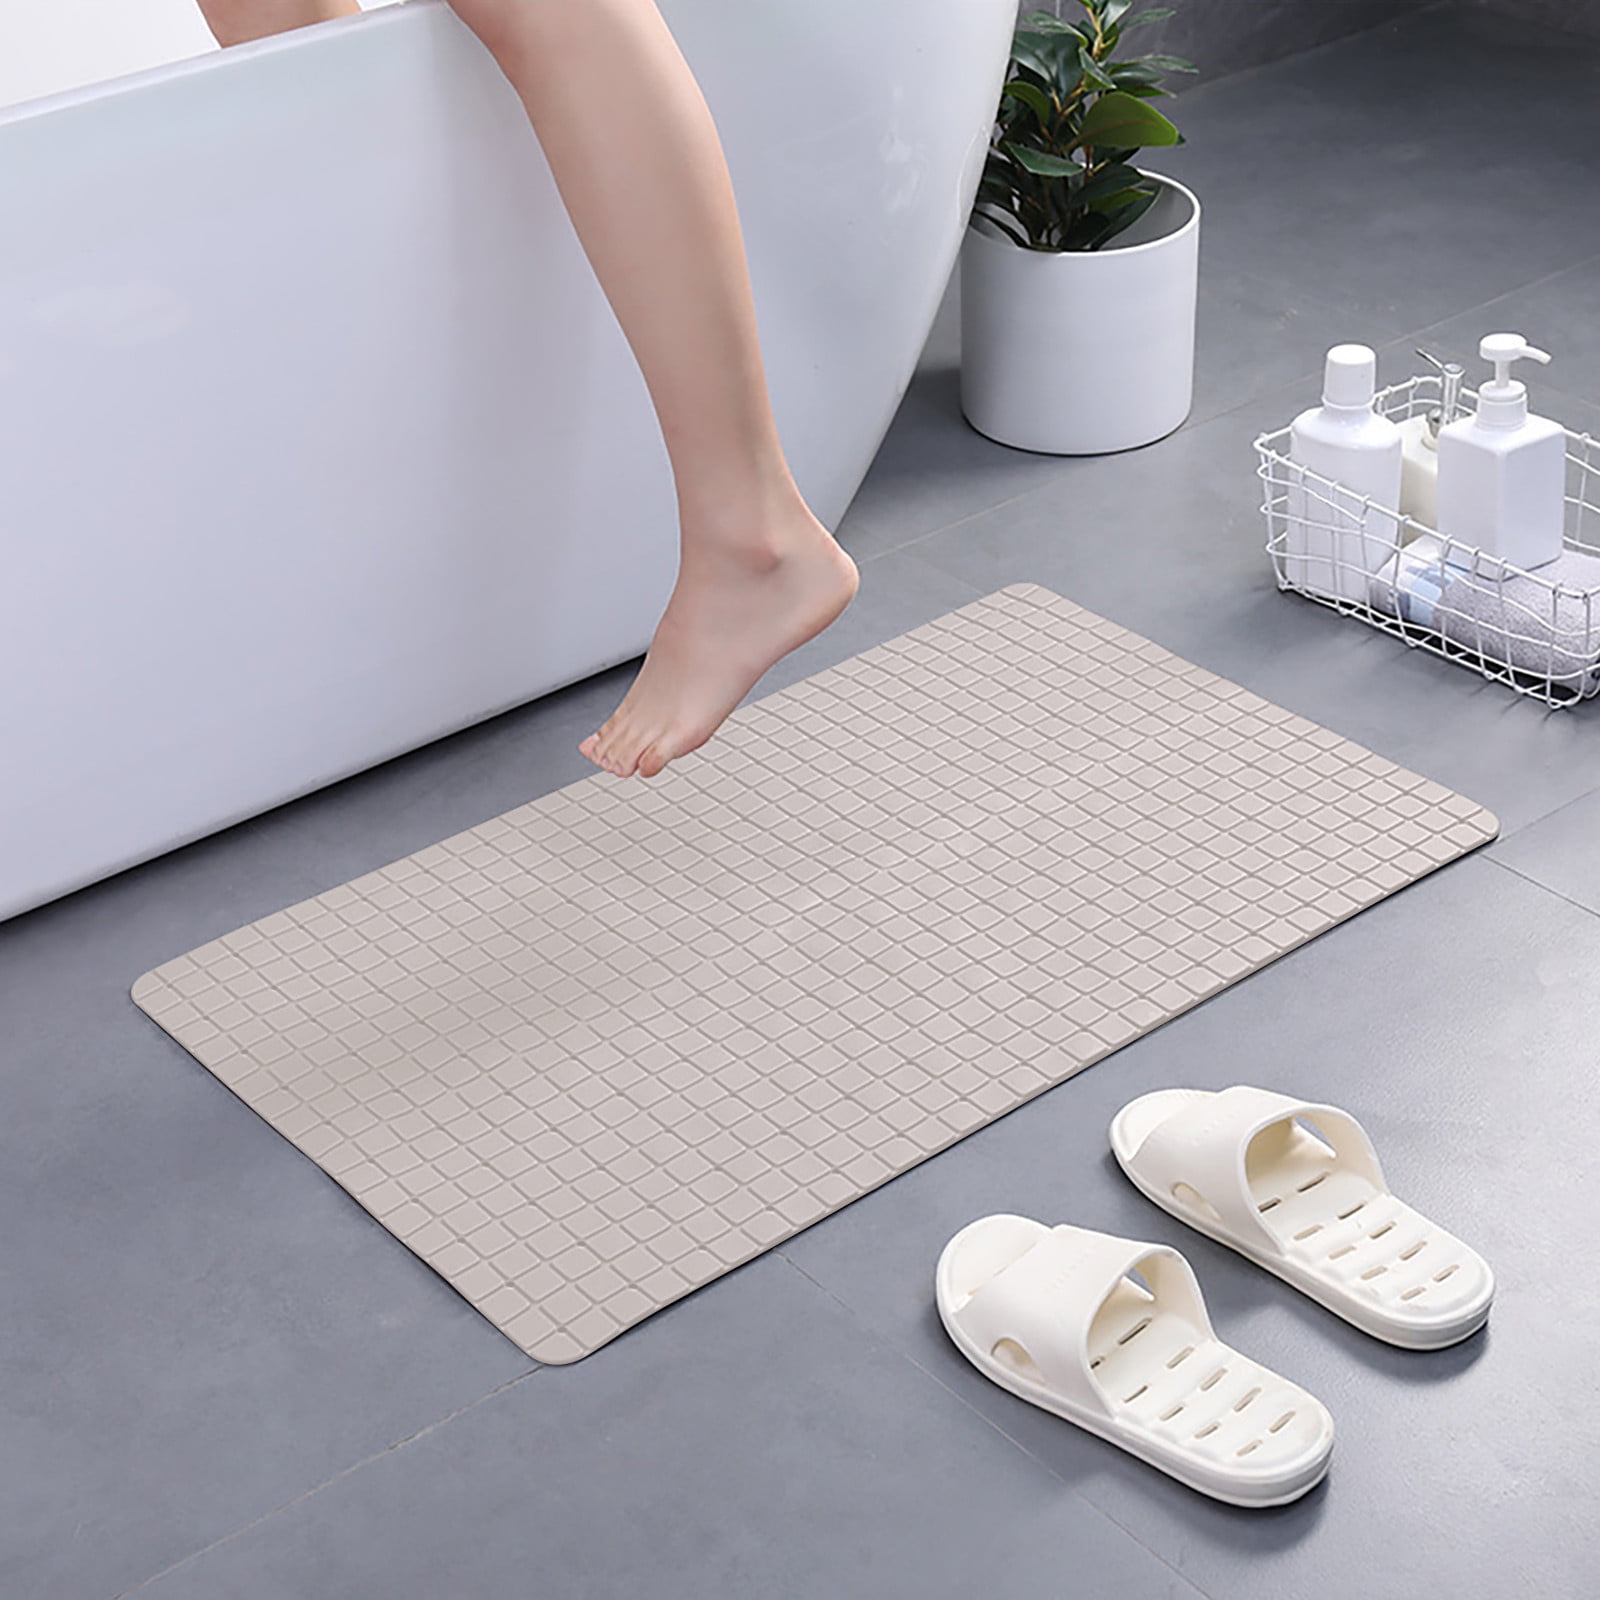 1pc Transparent Solid Color Bathtub Mat With Suction Cups & Drainage Holes  For Safety, Anti-slip, Massage, Suitable For Bathroom, Shower Room, Toilet.  Multiple Colors Available: Black, White, Grey, Blue, Etc.